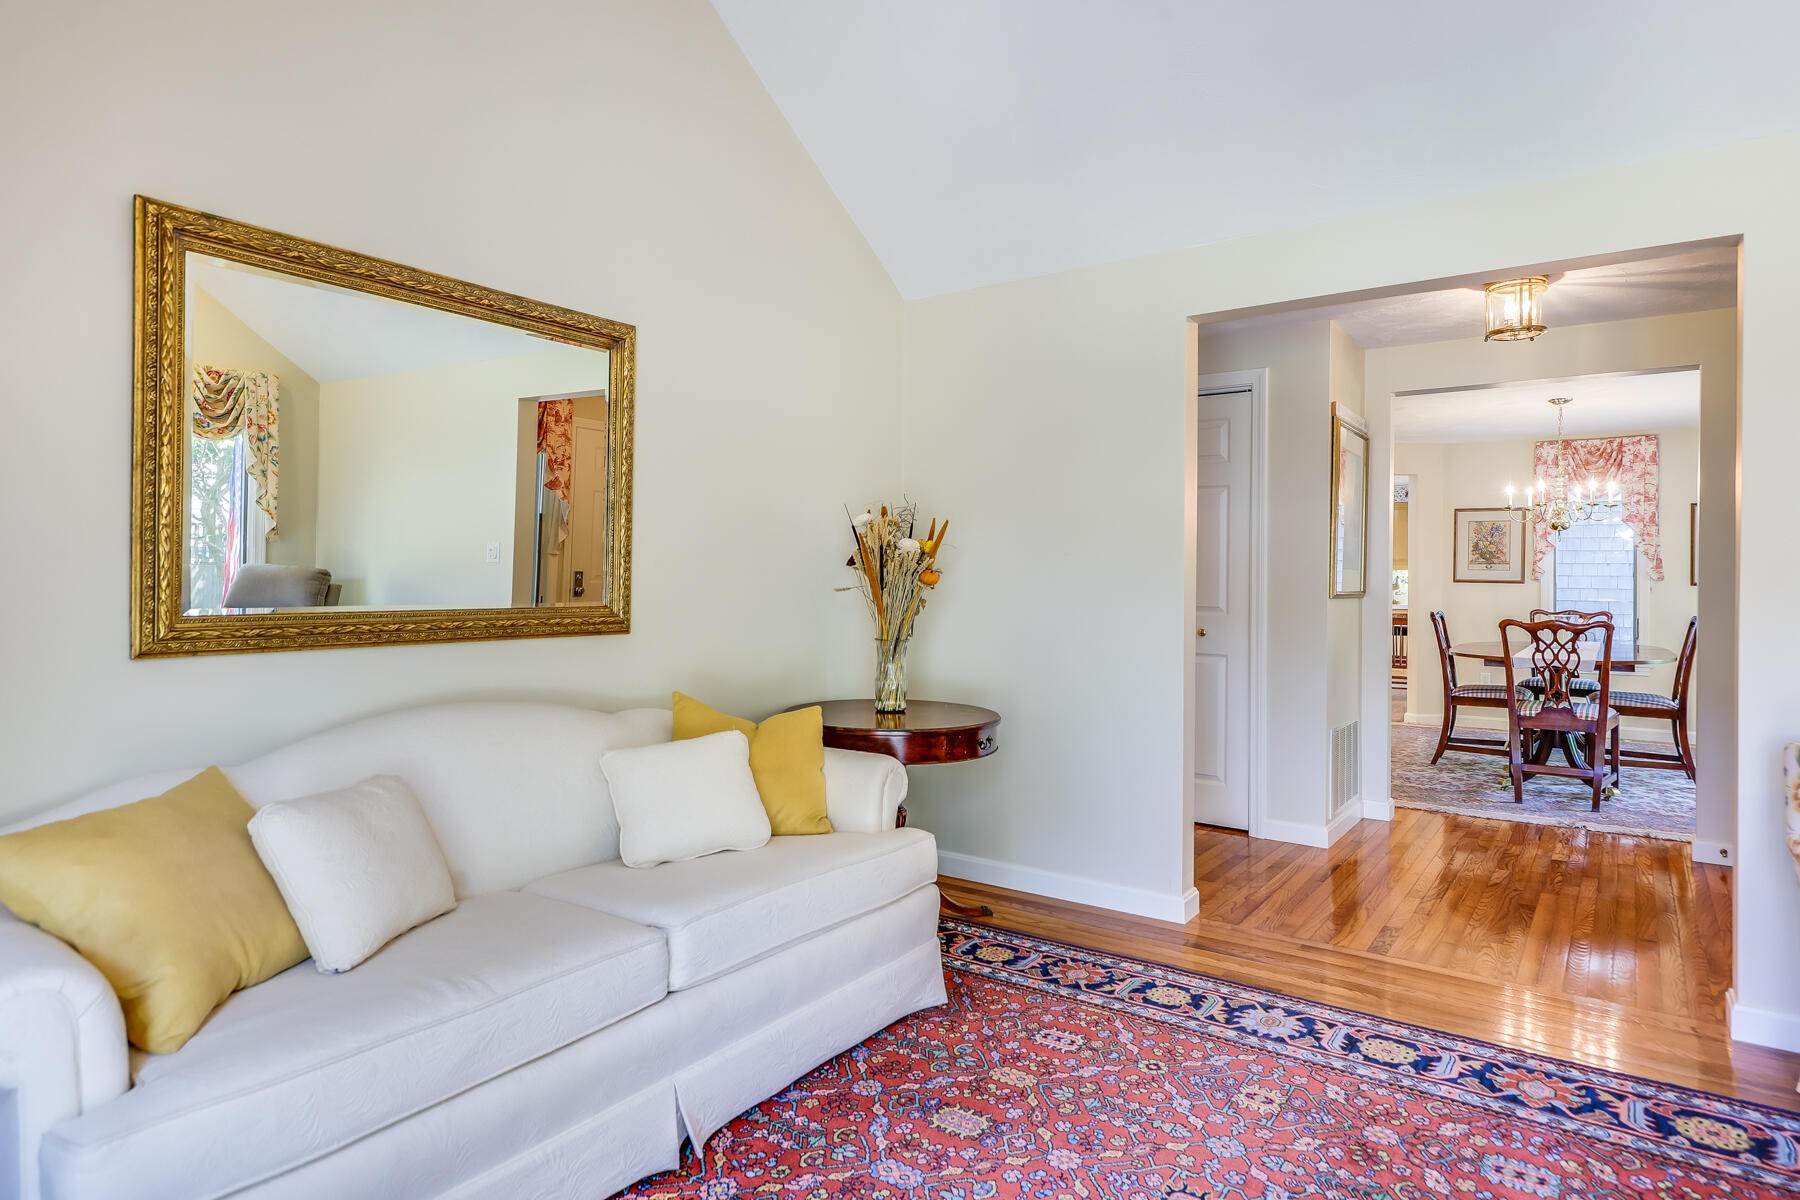 3. Condominiums for Sale at 4 West Woods, Yarmouth Port, MA, 02675 4 West Woods Yarmouth Port, Massachusetts 02675 United States